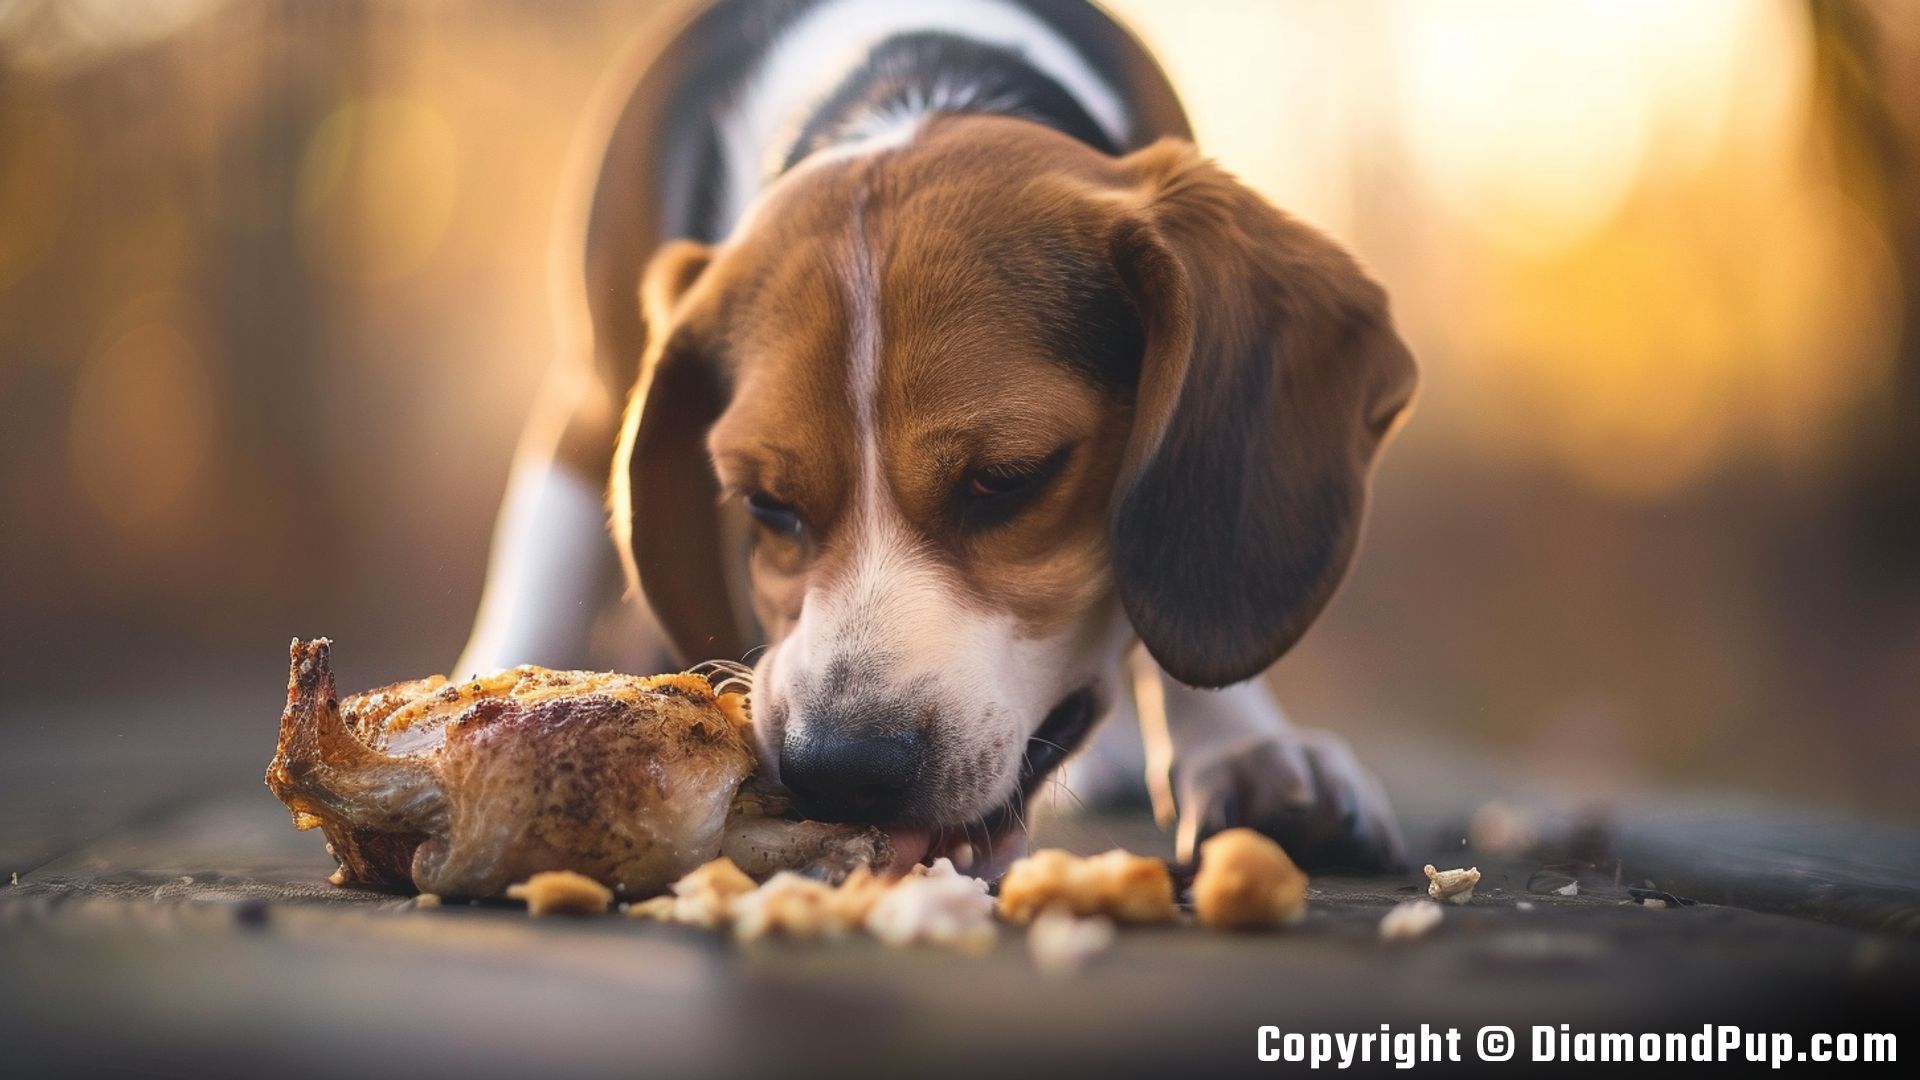 Image of an Adorable Beagle Eating Chicken